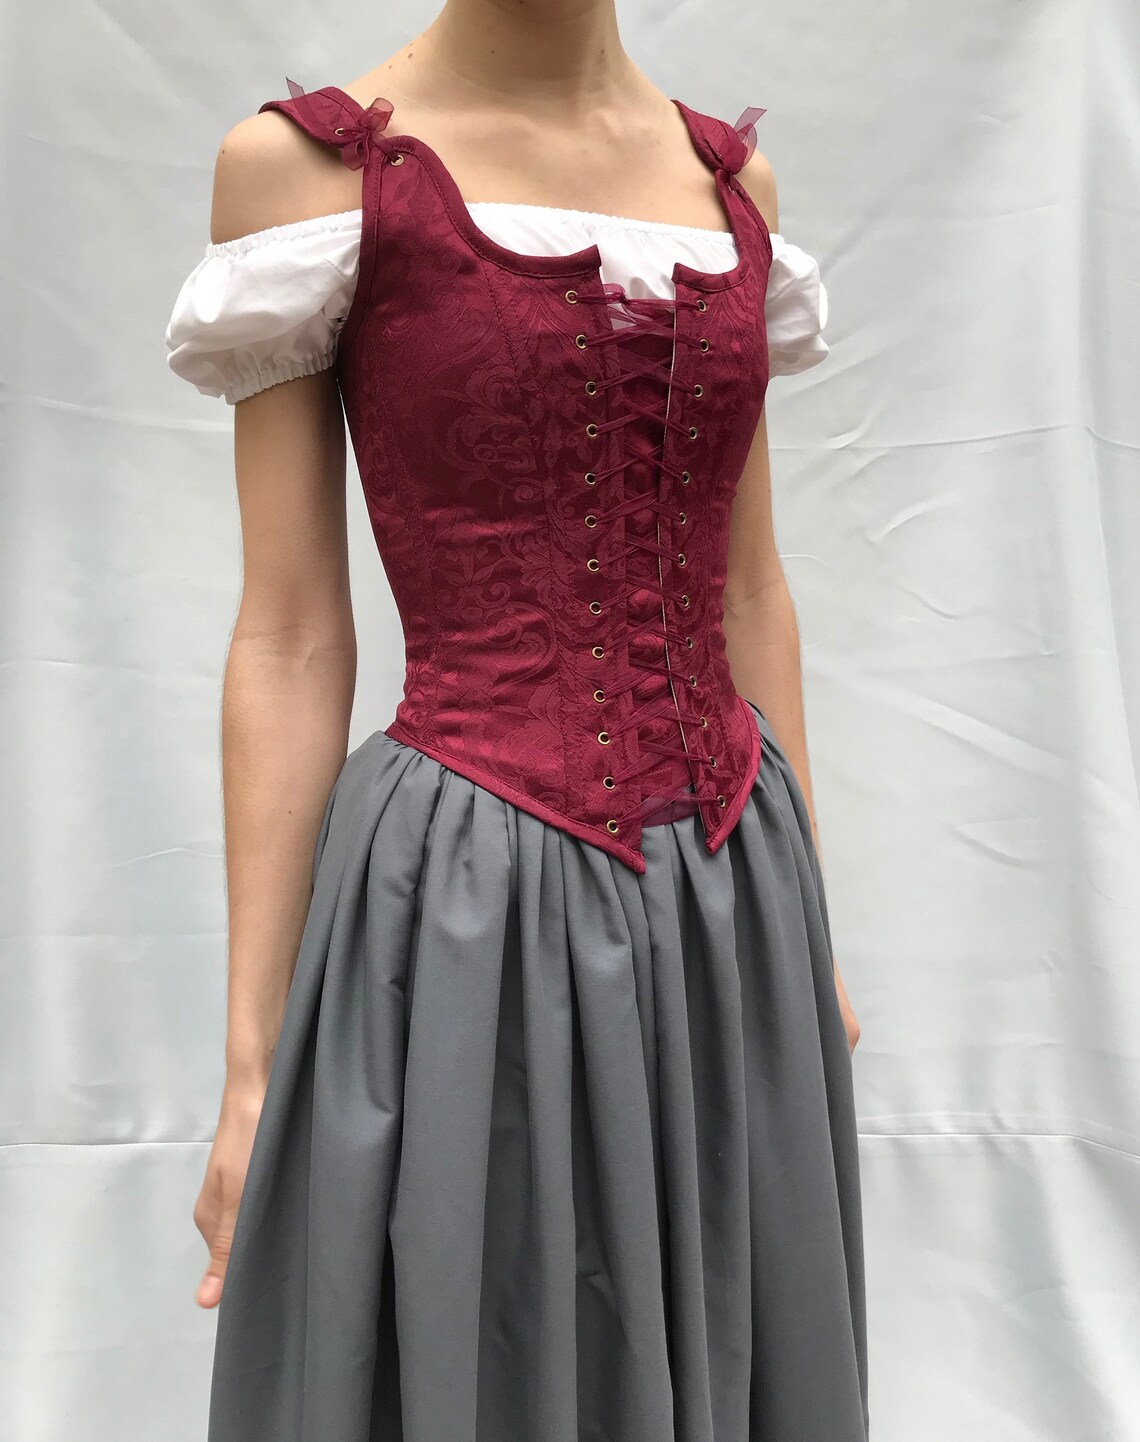 Peasant Bodice Renaissance Corset In Red Wine With Straps Etsy